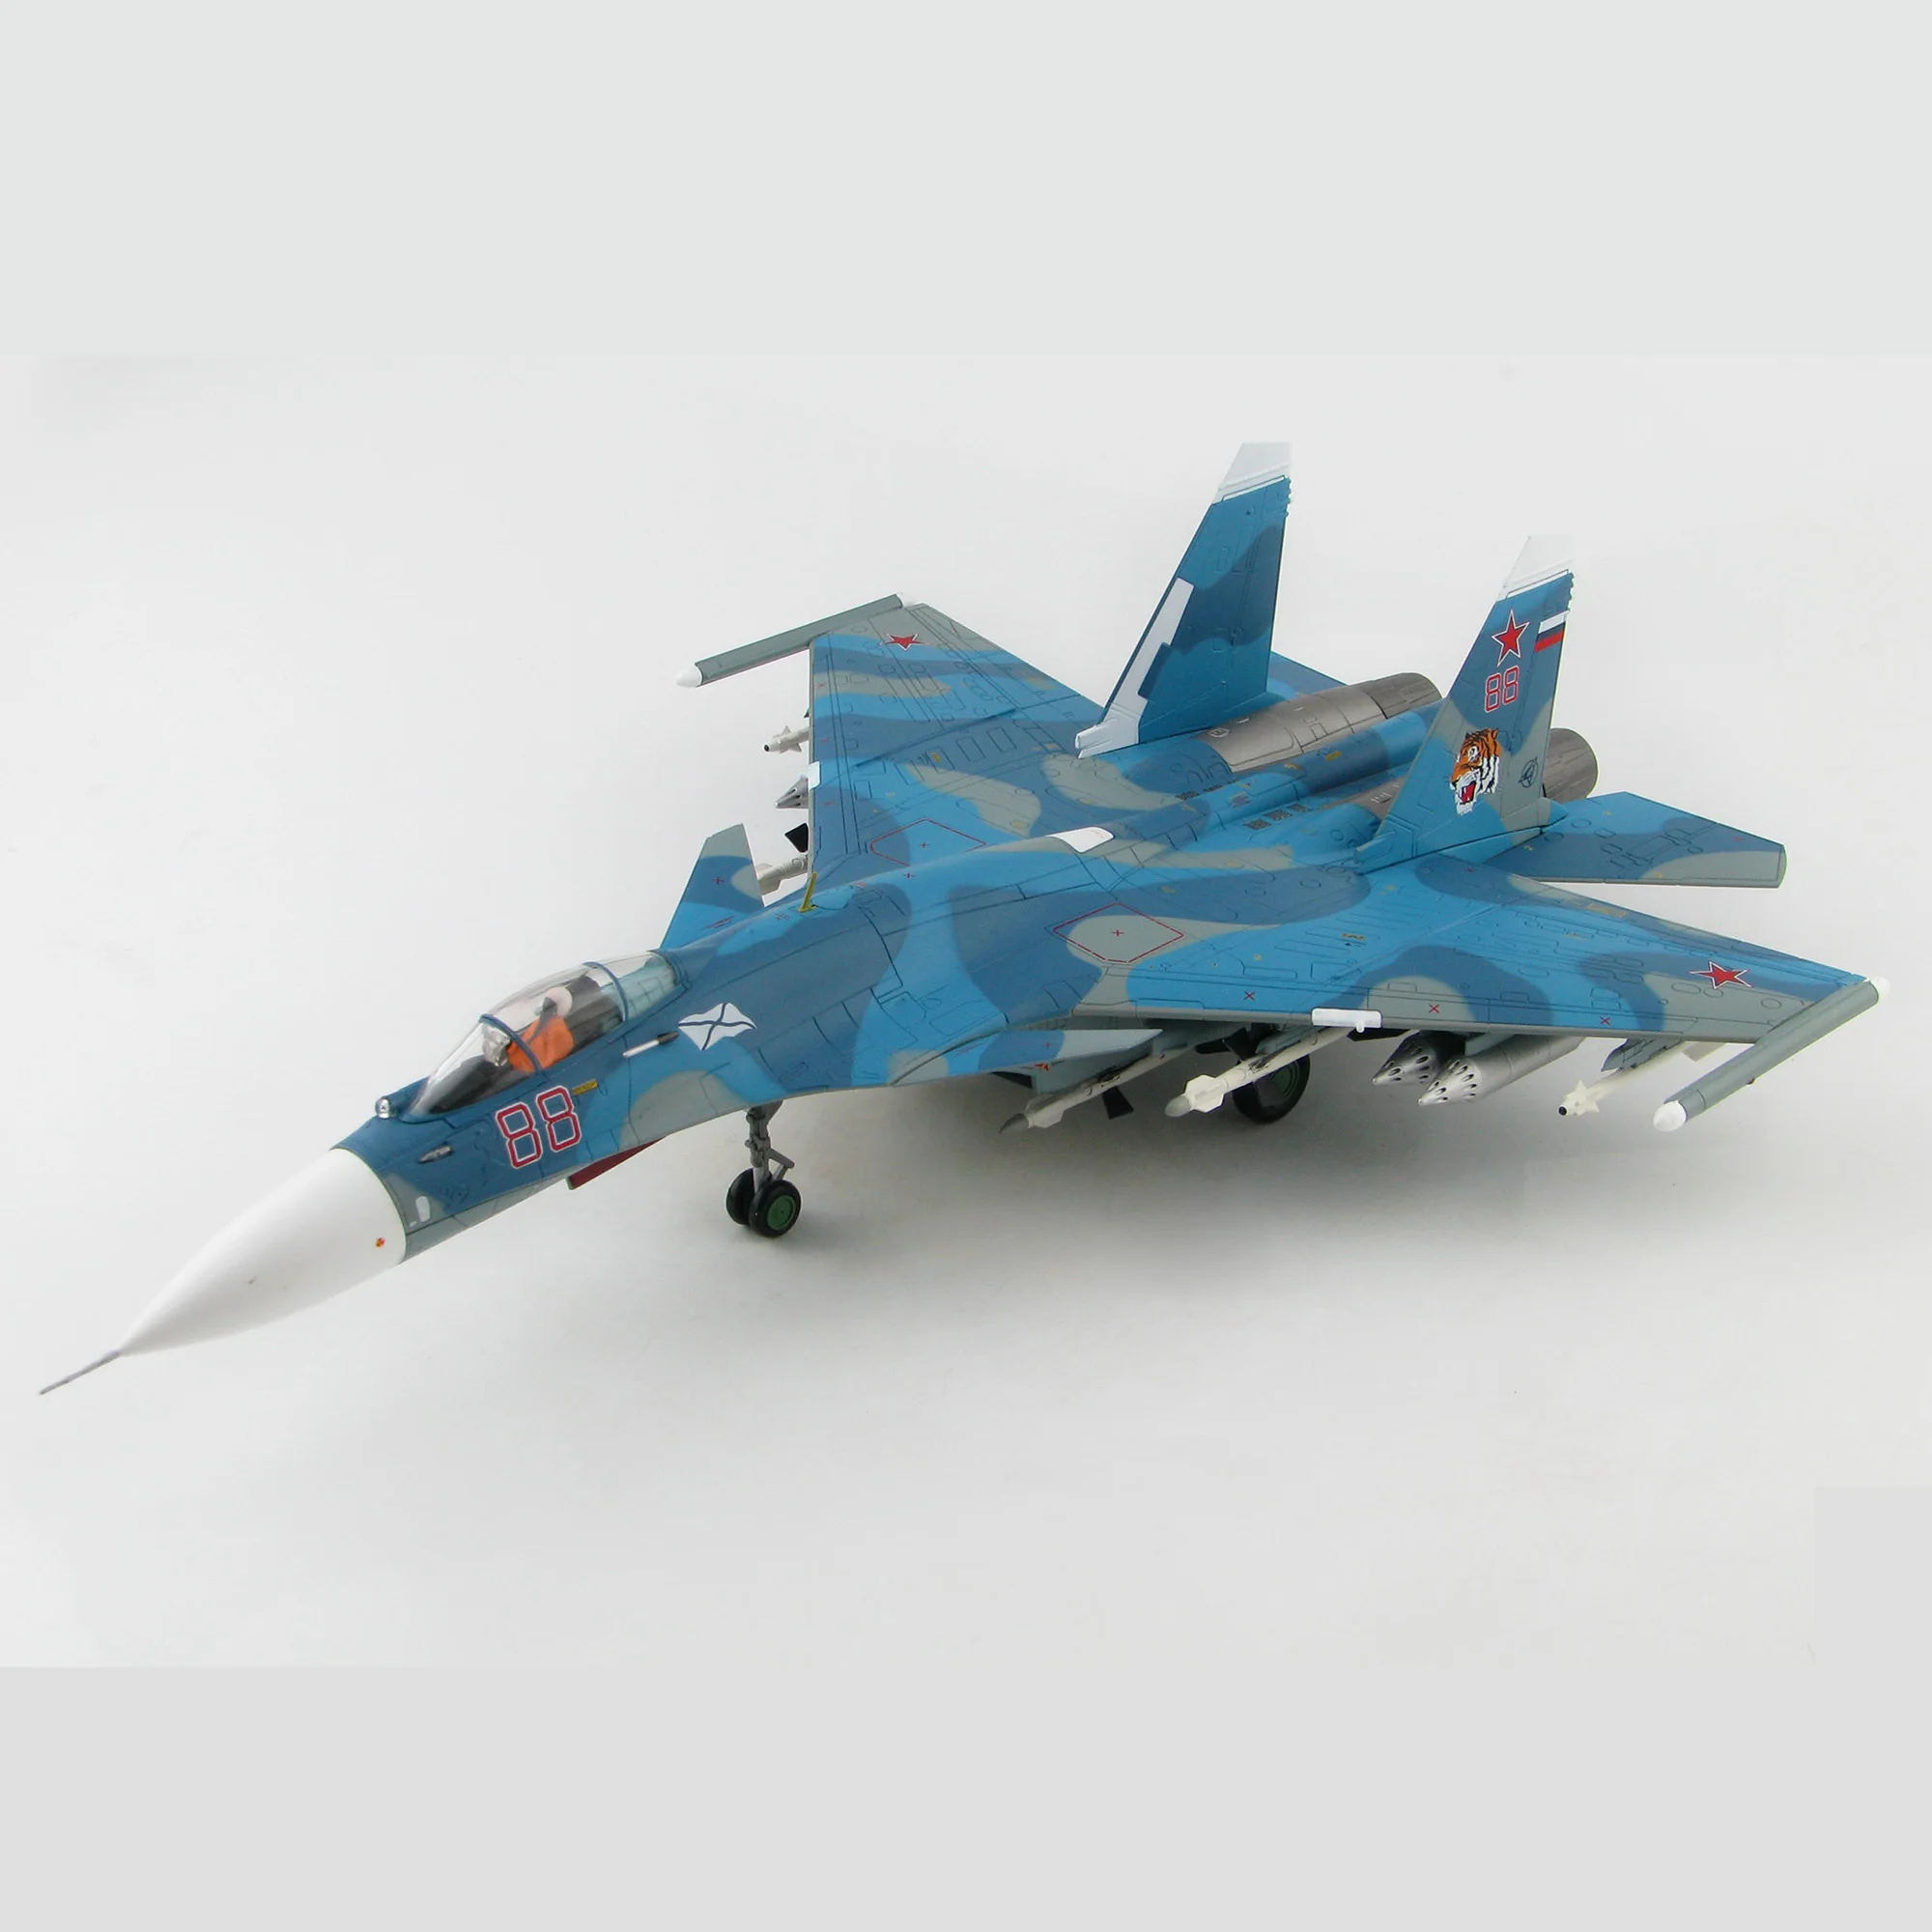 

Die cast Su-33 Fighter jet Alloy Plastic Model 1:72 Scale Toy Gift Collection Simulation Display Decoration Men's Gifts